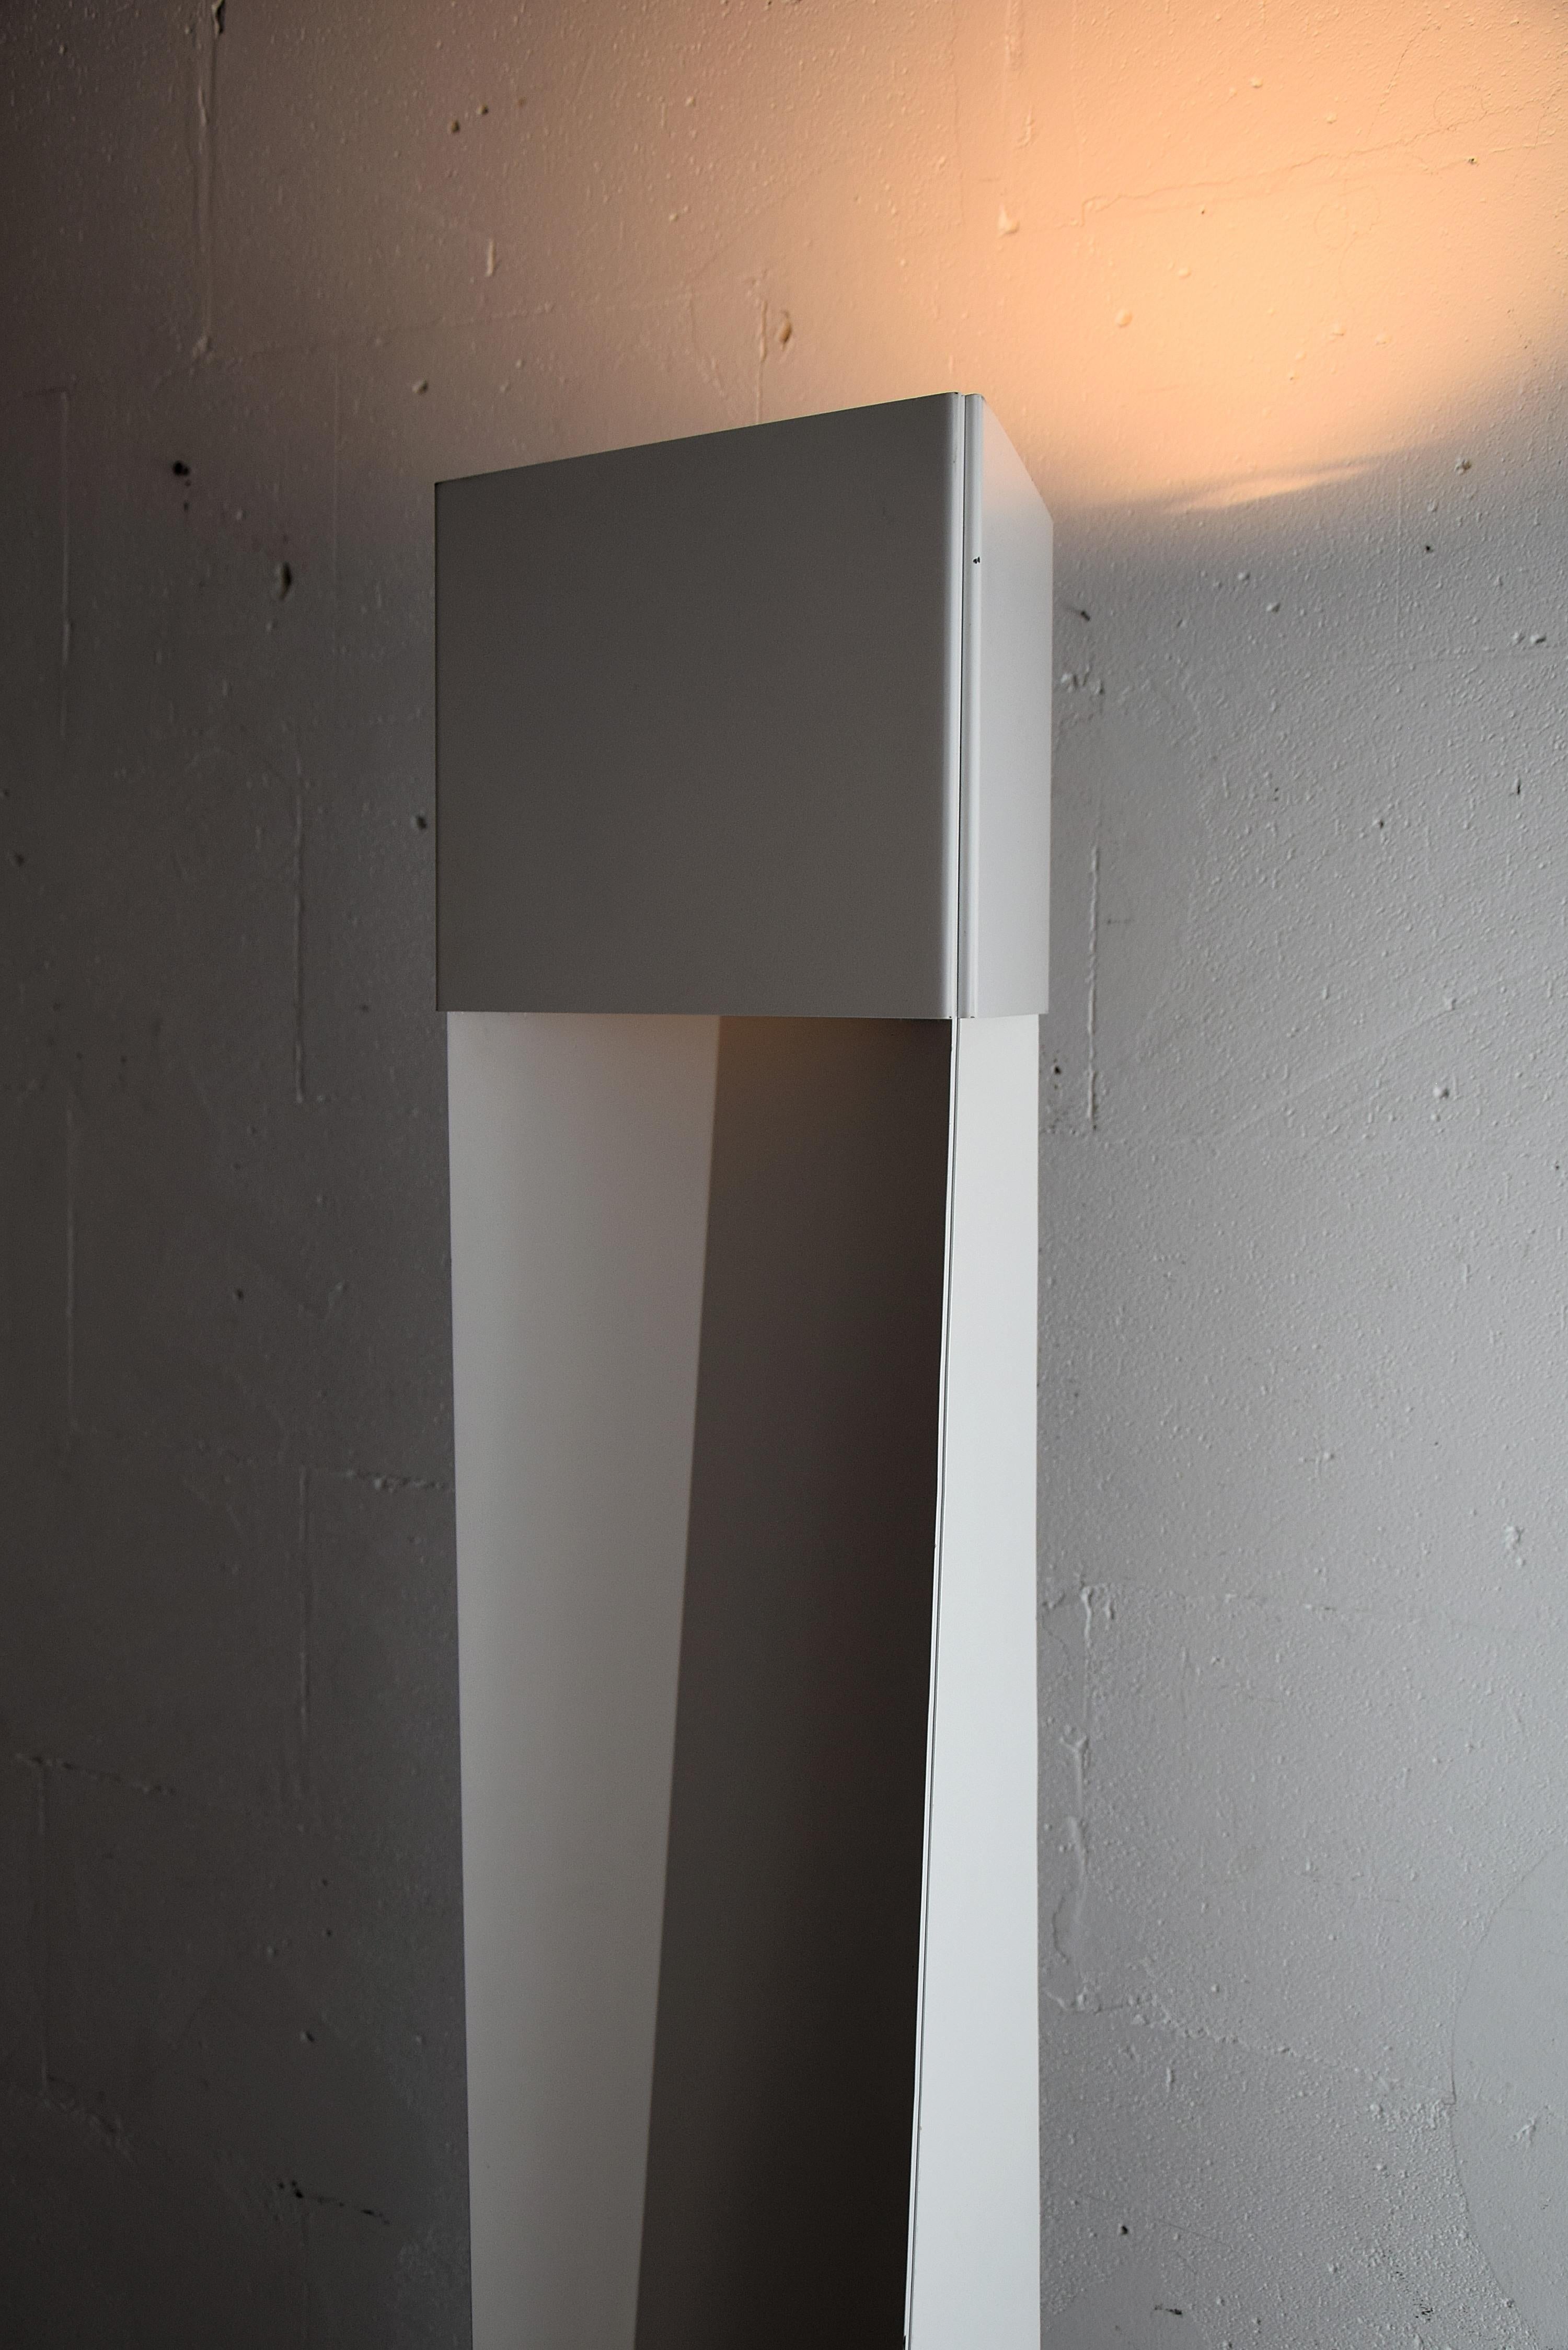 Postmodern sculptured painted folded metal floor lamp slack 1 by Mart Van Schijndel for Martech, 1979. This beauty is in great condition but his some minor spots as can be seen in the images. The lamp will be shipped overseas in a custom made wooden